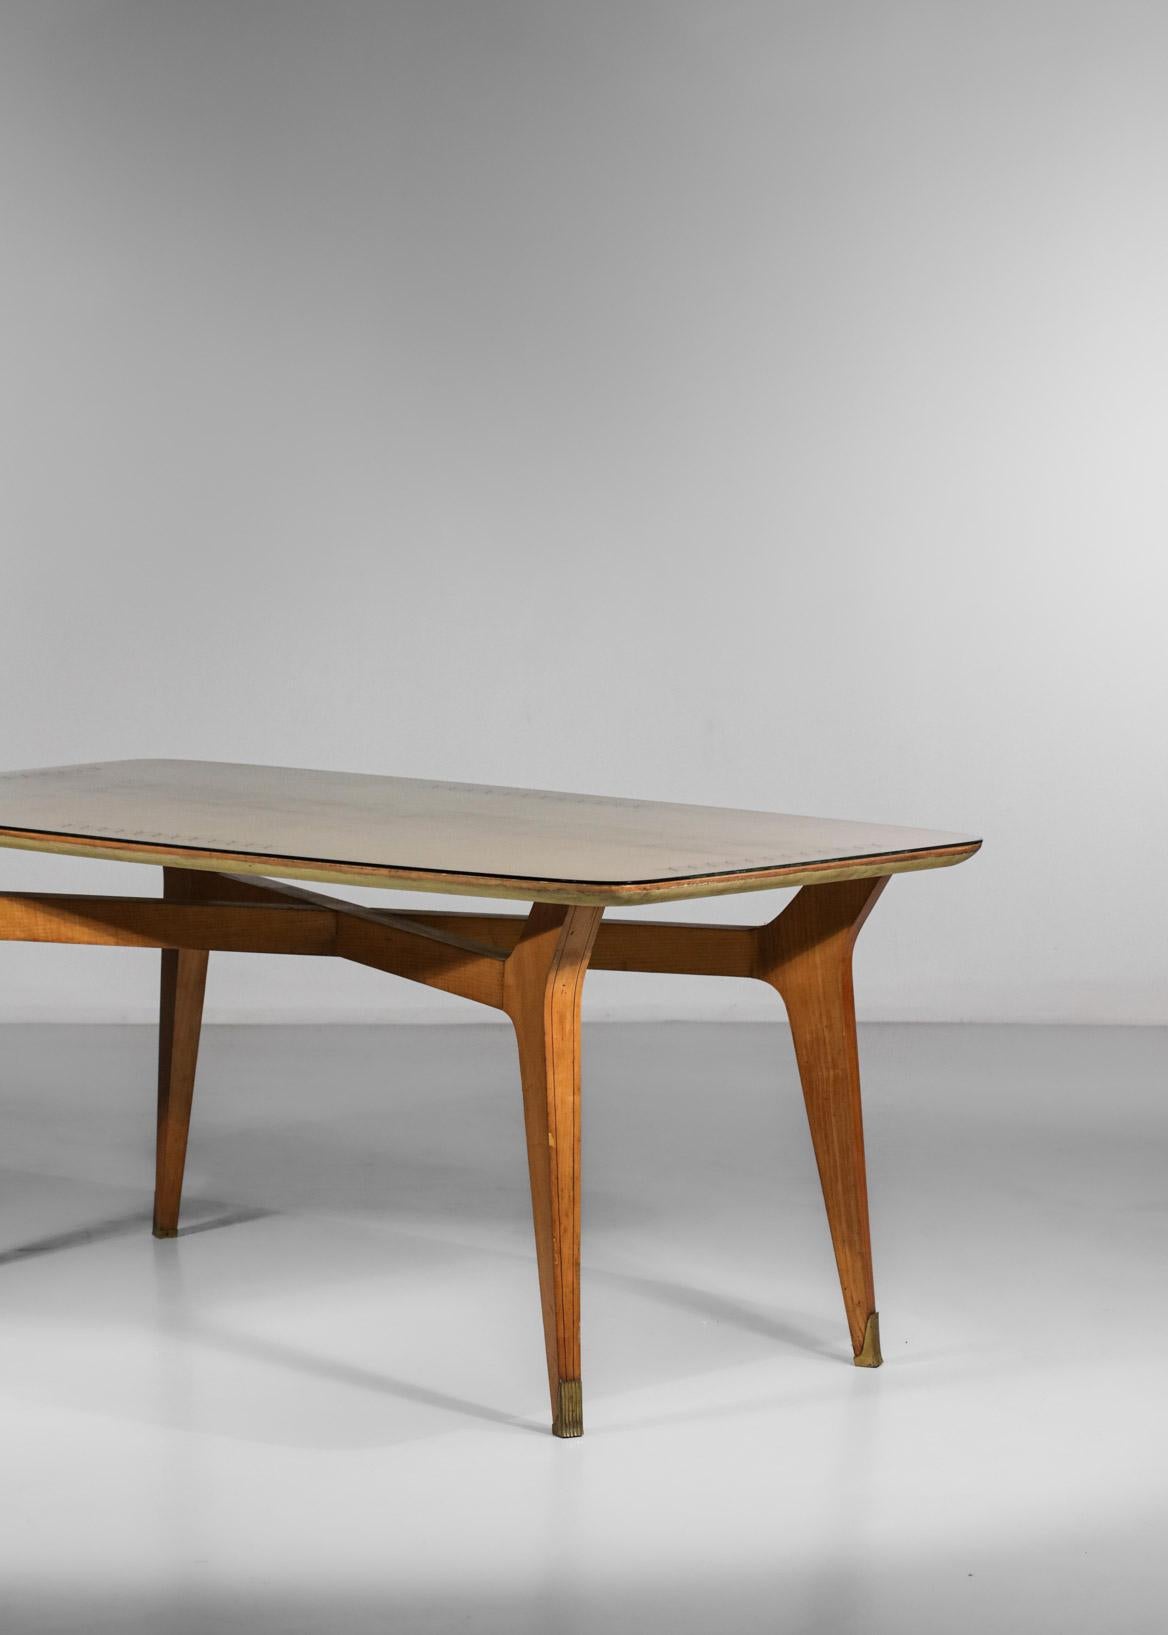 Italian dining table from the 60s. Structure in solid beech and veneer with an acid-etched glass top. Decorated with golden ribbons on each side of the top, the base is finished with a brass piece. Table with sober and elegant lines with nice